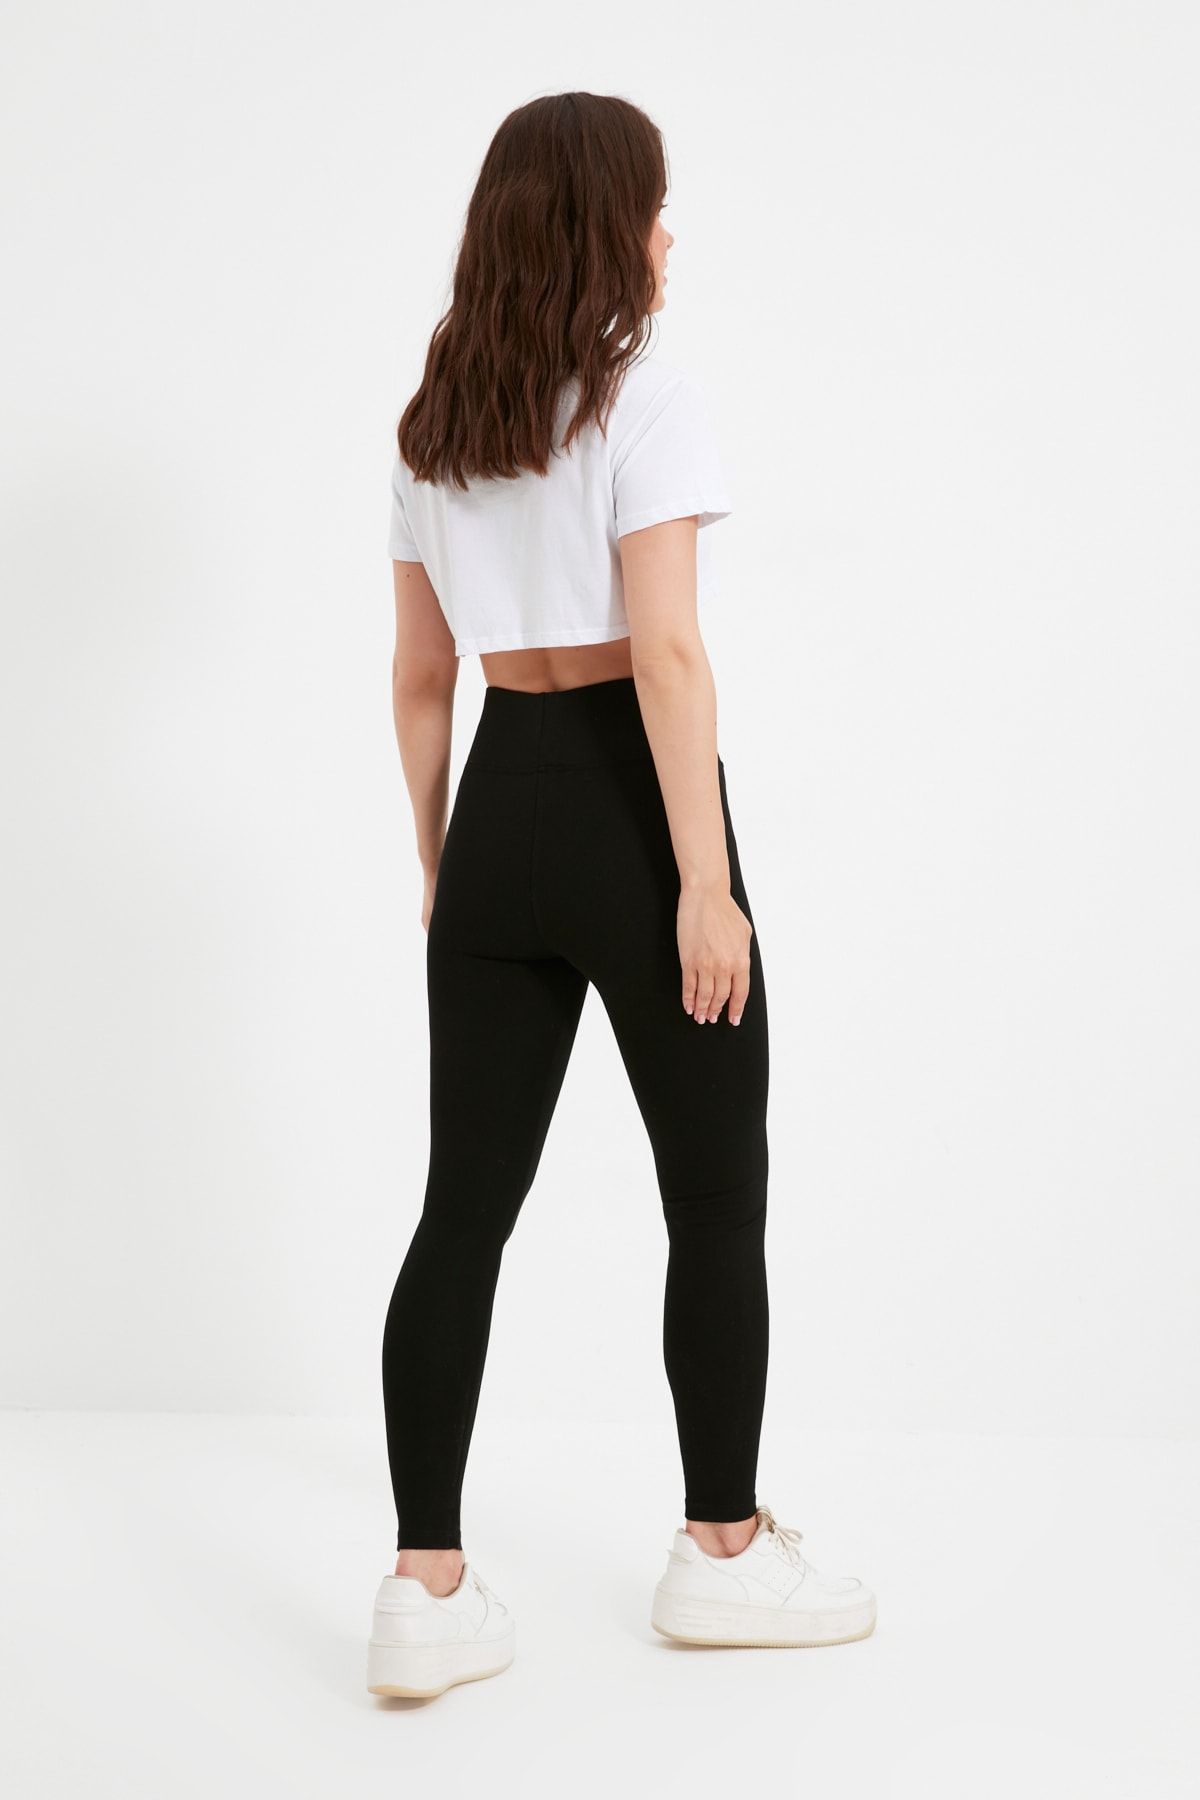 Buy Happiness Istanbul High Waist Tights, Thick Knitted Leggings Online